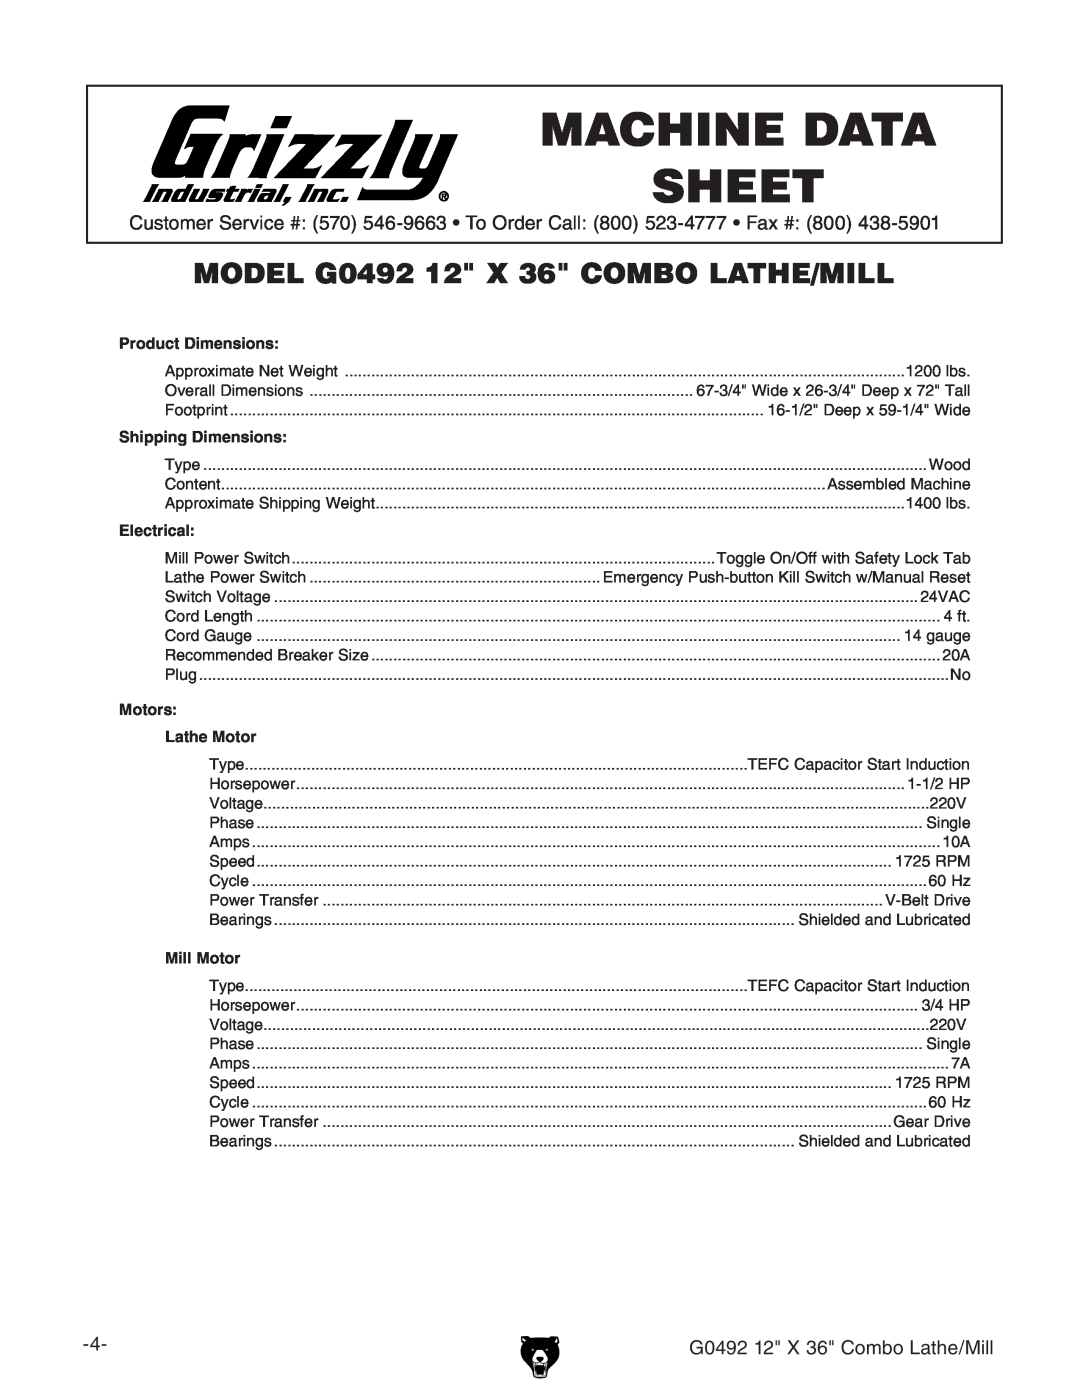 Grizzly Machine Data Sheet, MODEL G0492 12 X 36 COMBO LATHE/MILL, Product Dimensions, Shipping Dimensions, Electrical 